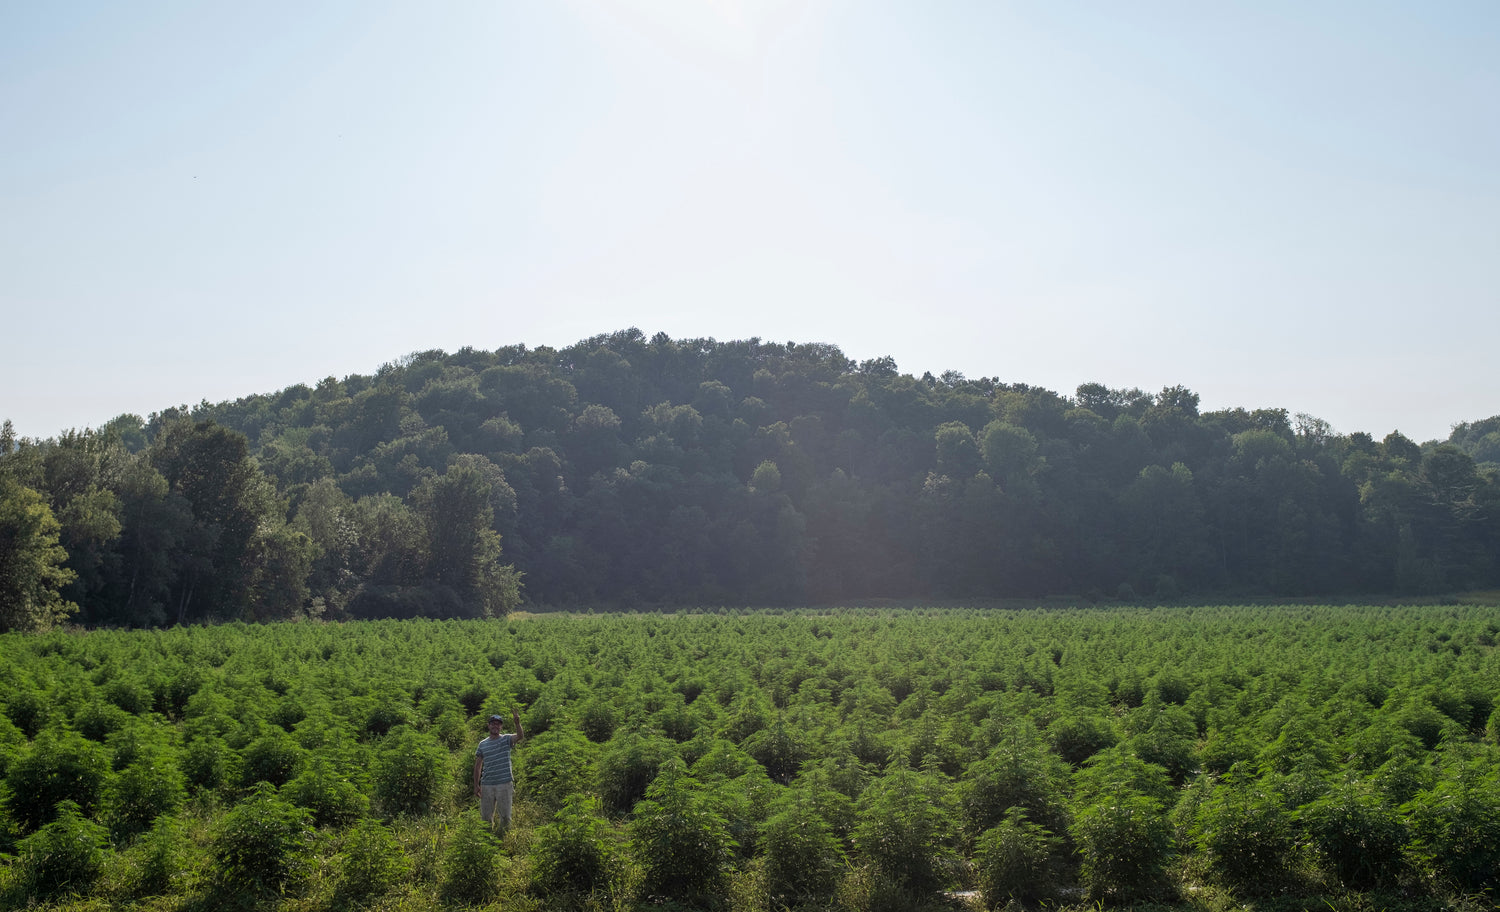 hemp field with a man standing in the middle